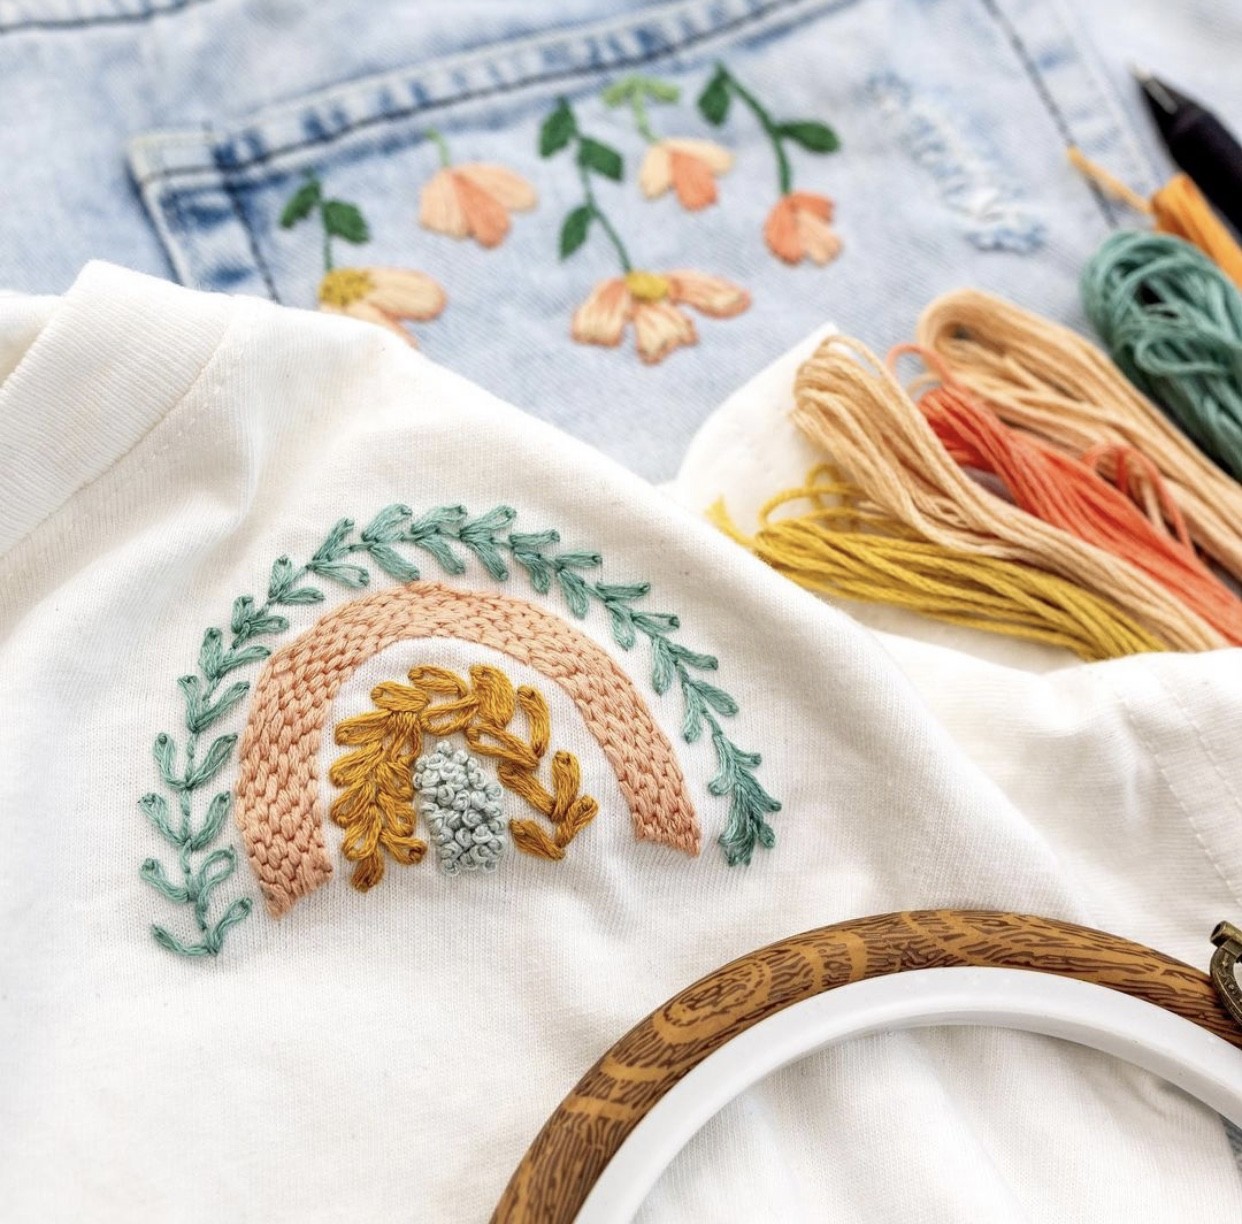 This image shows modern embroidery designs embroidered onto denim shorts and a white cotton shirt.